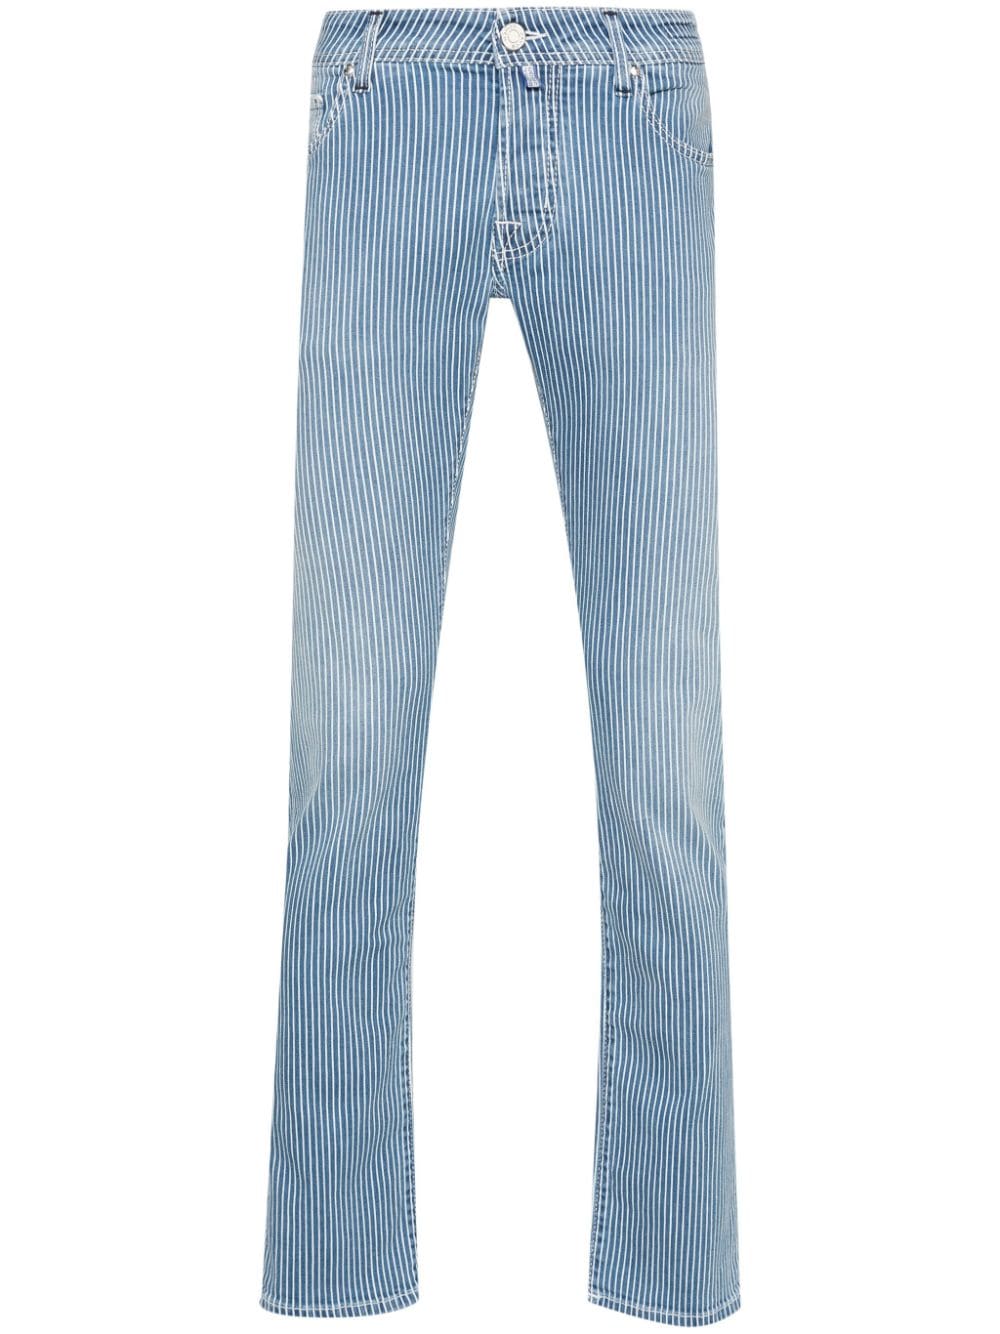 Jacob Cohen Nick Striped Jeans In Blue